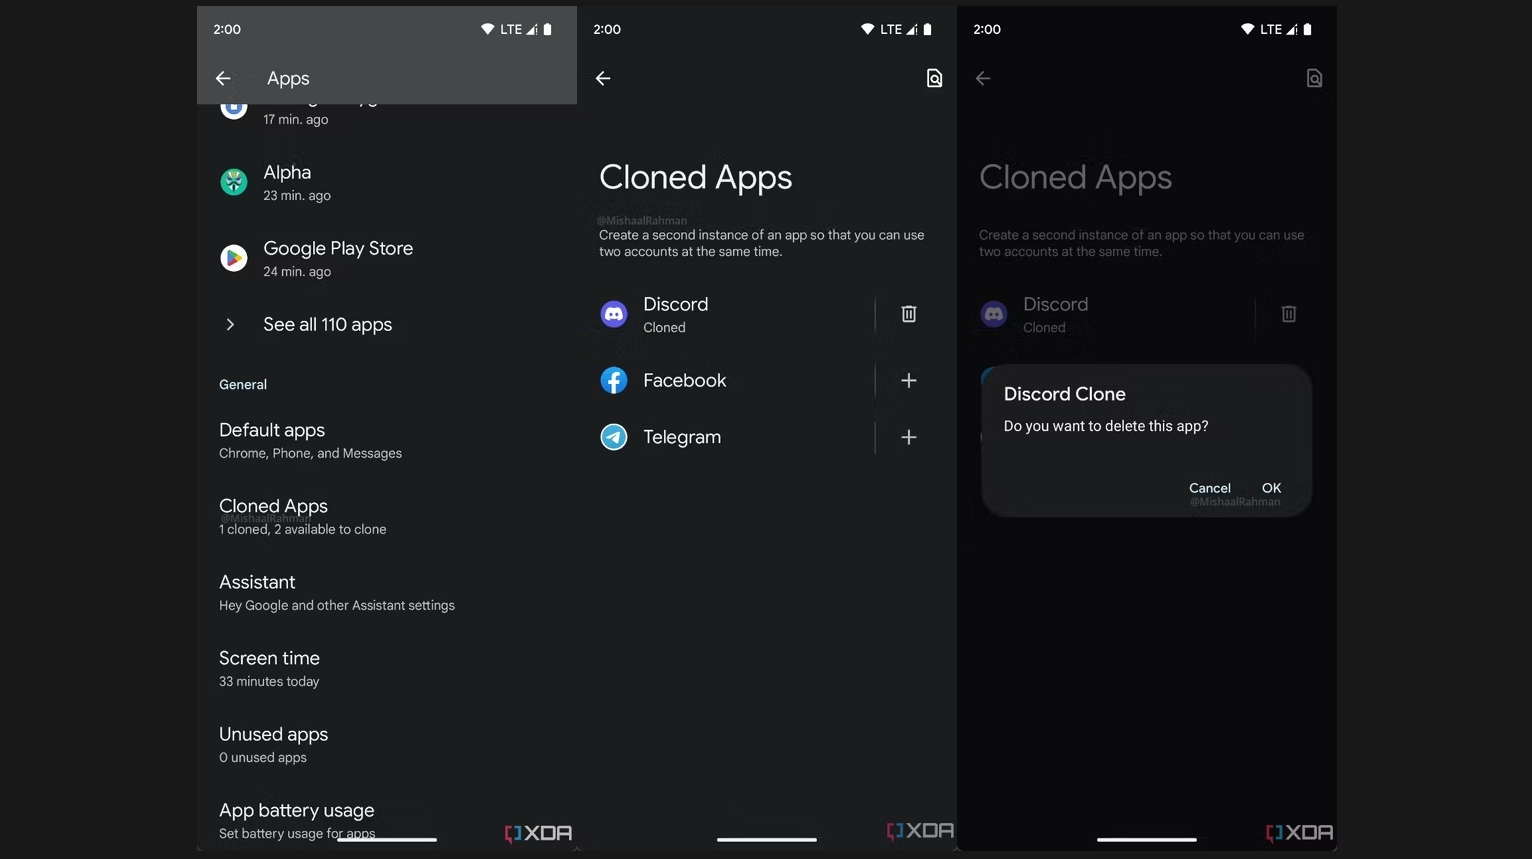 Screenshots showing the functionality of cloned apps in Android 14